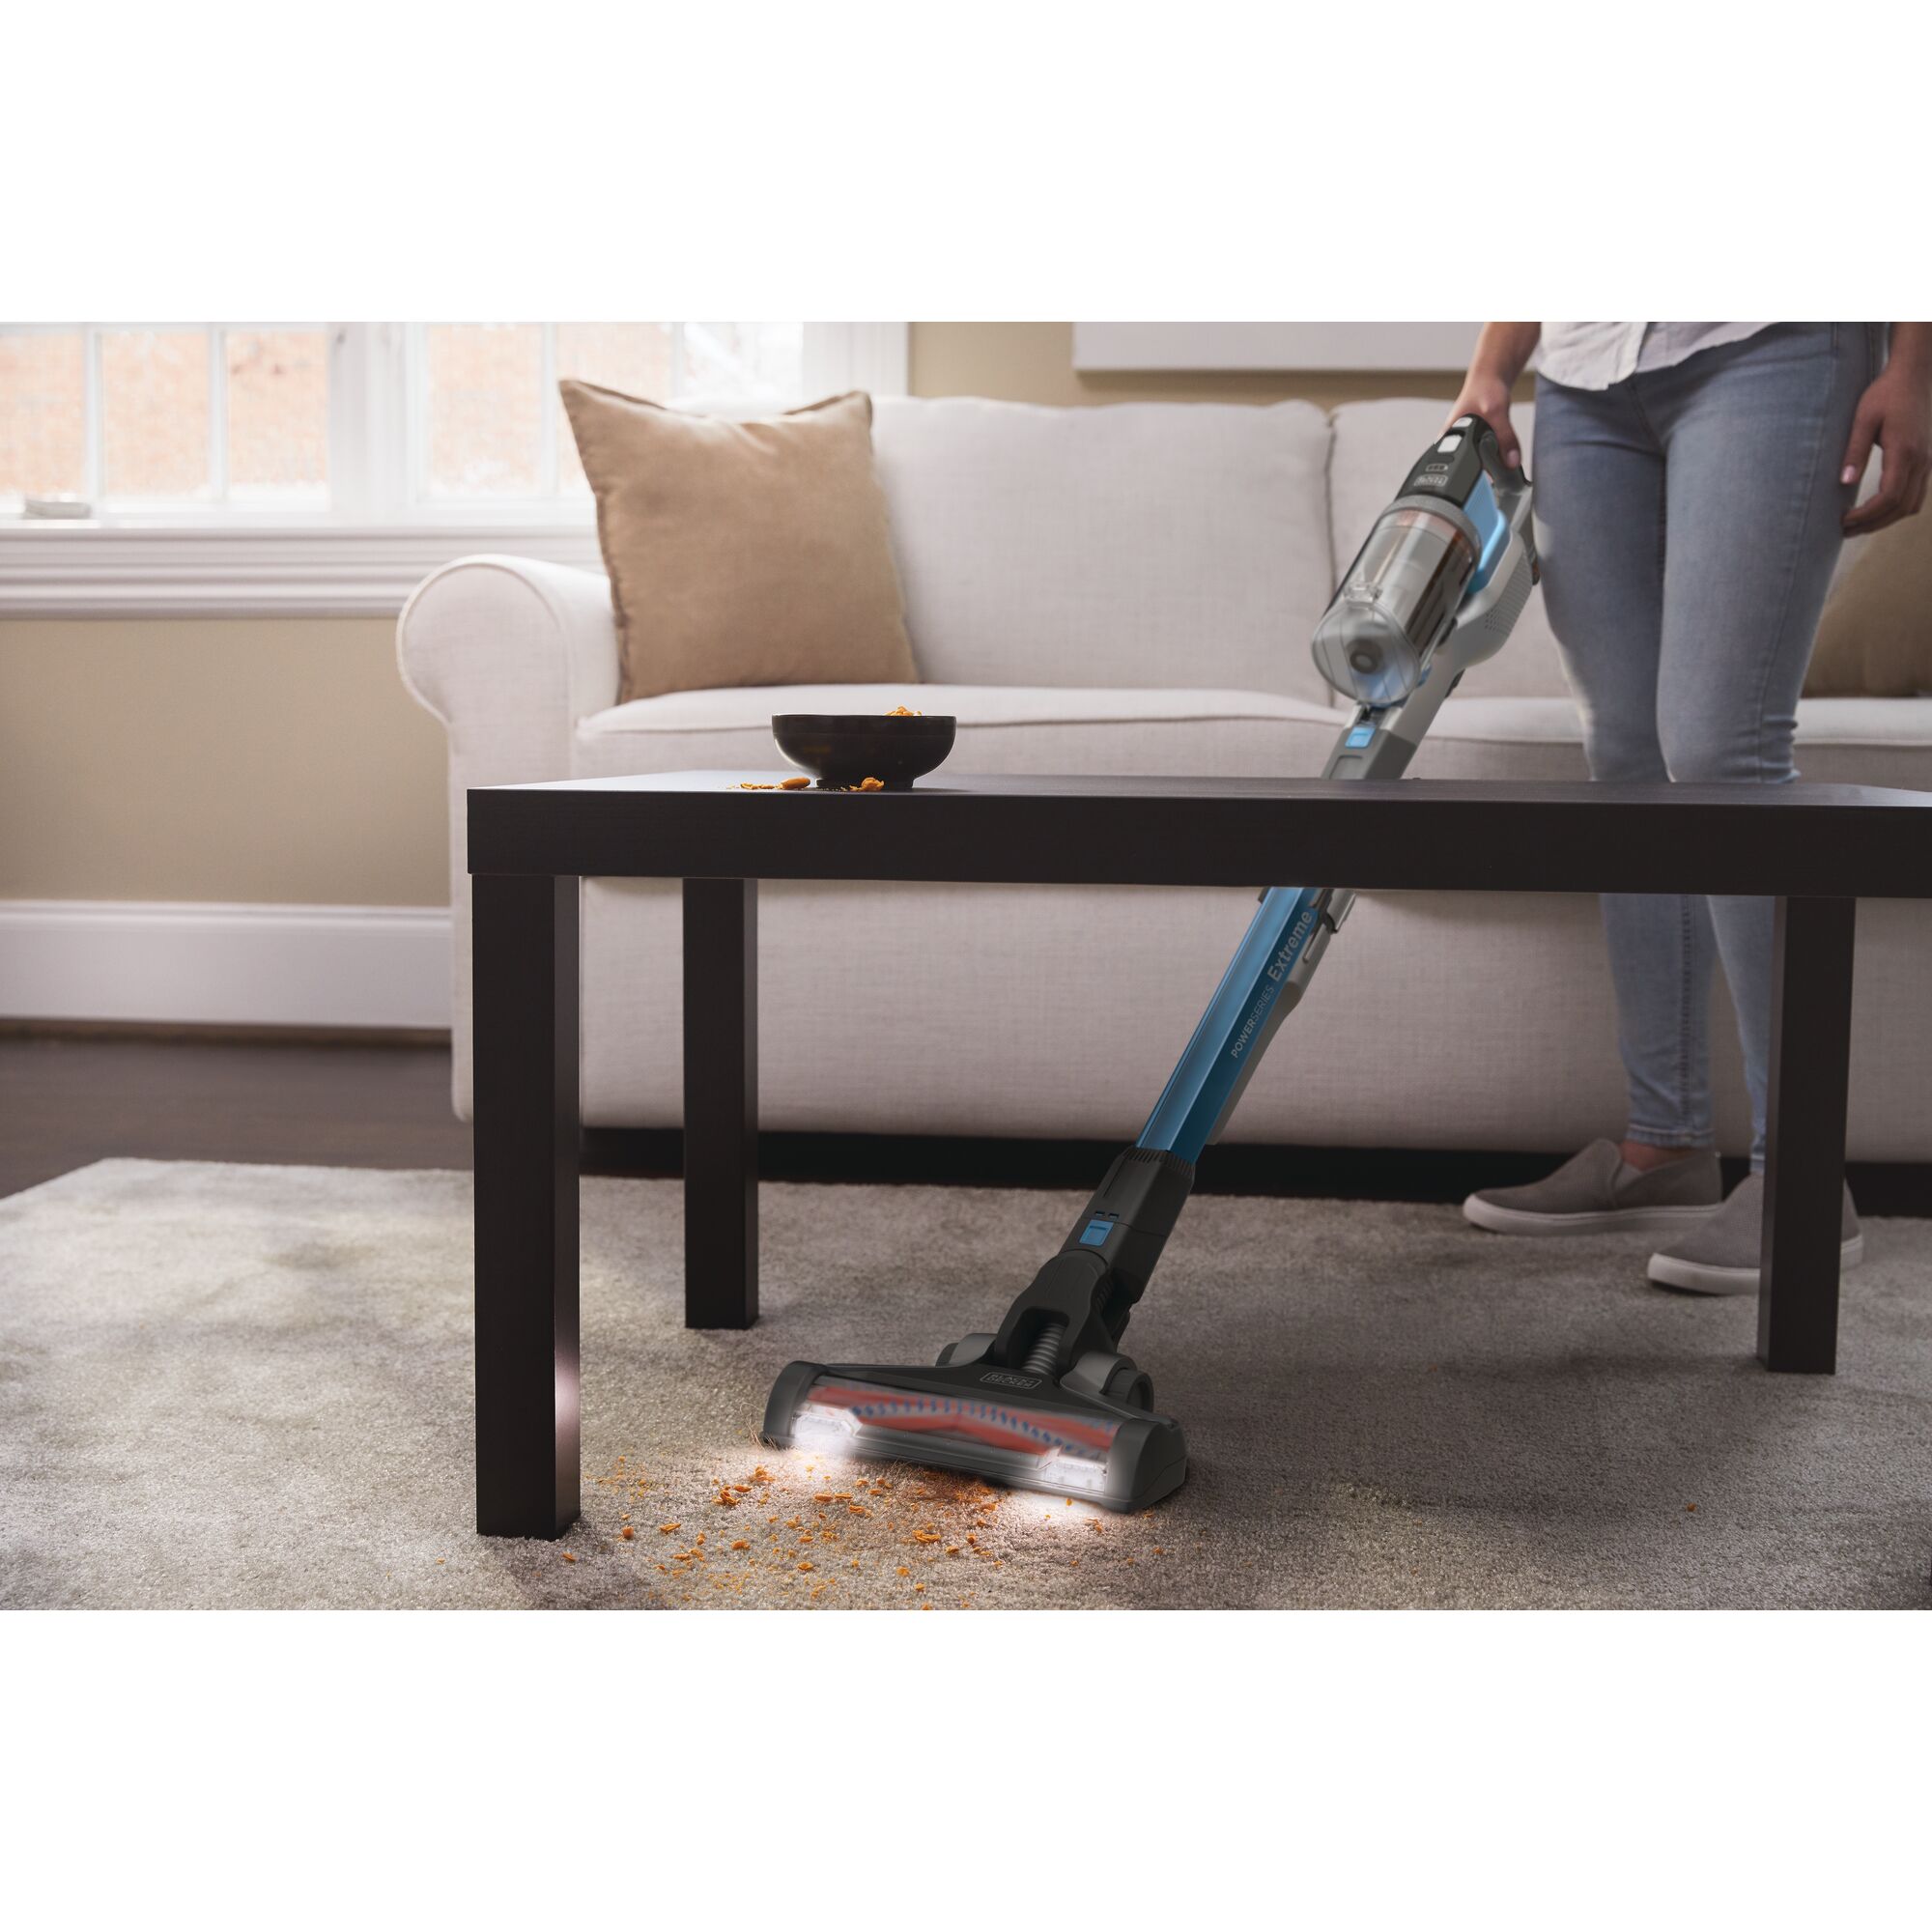 POWERSERIES Extreme Cordless Stick Vacuum Cleaner being used to clean dirt on a carpet by a person.